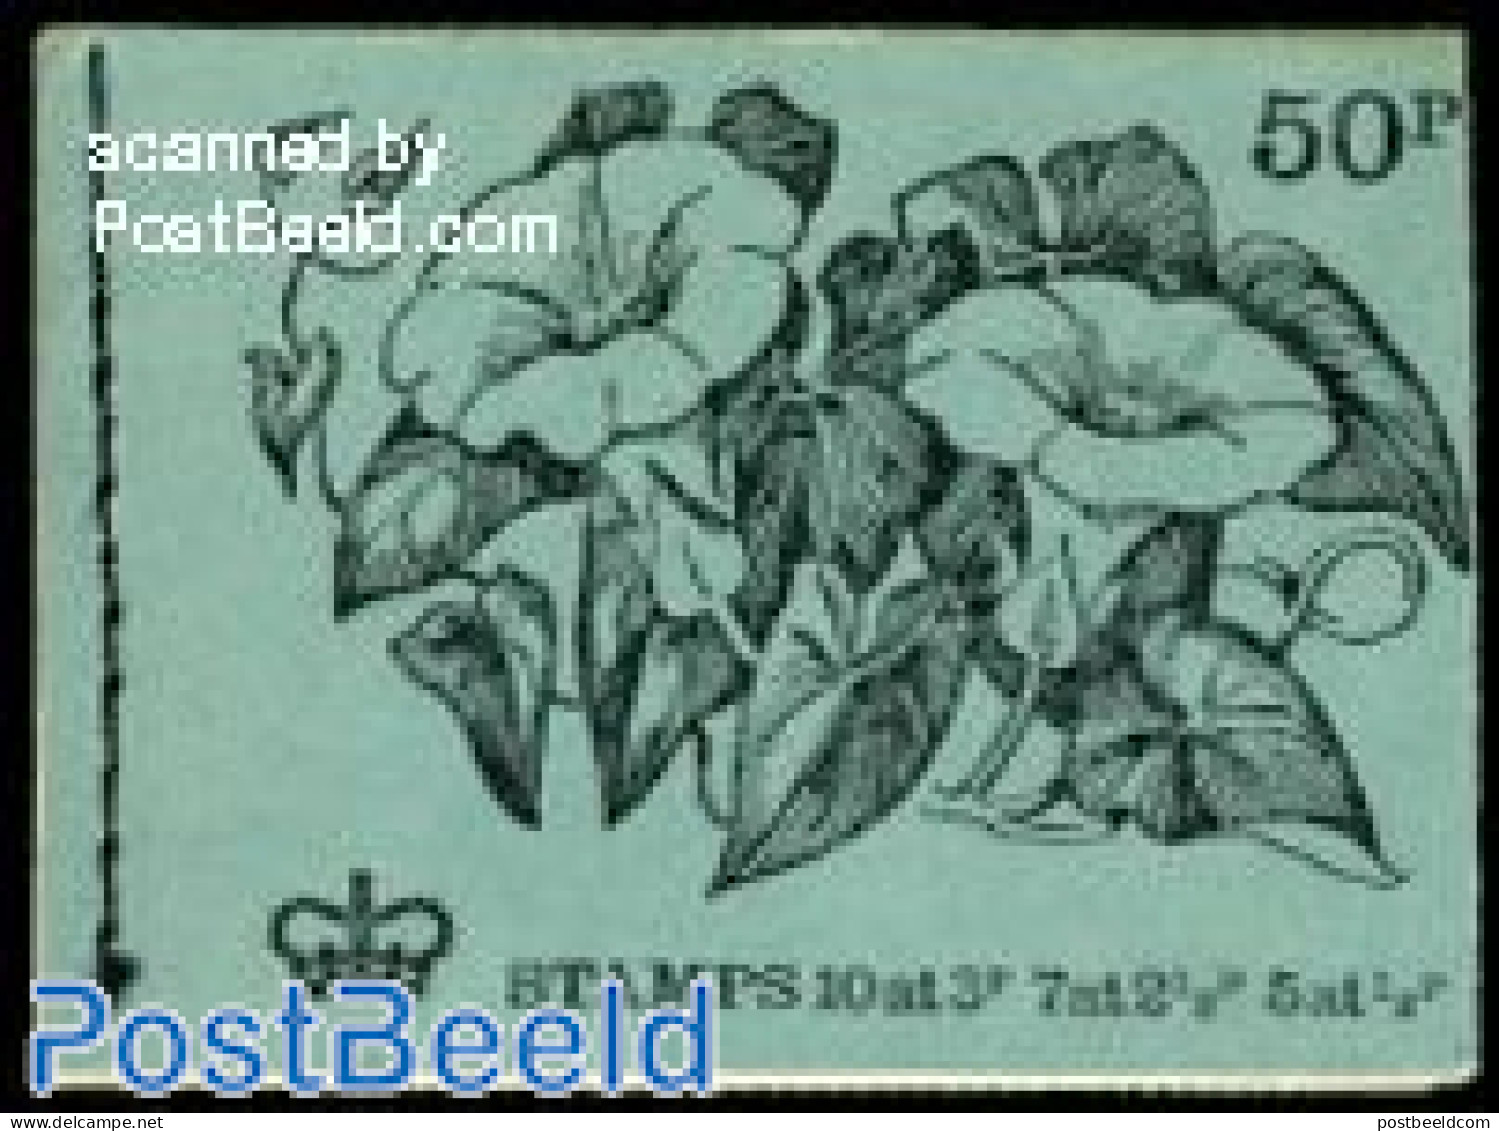 Great Britain 1971 Definitives Booklet (february 1971), Mint NH, Nature - Flowers & Plants - Stamp Booklets - Nuevos